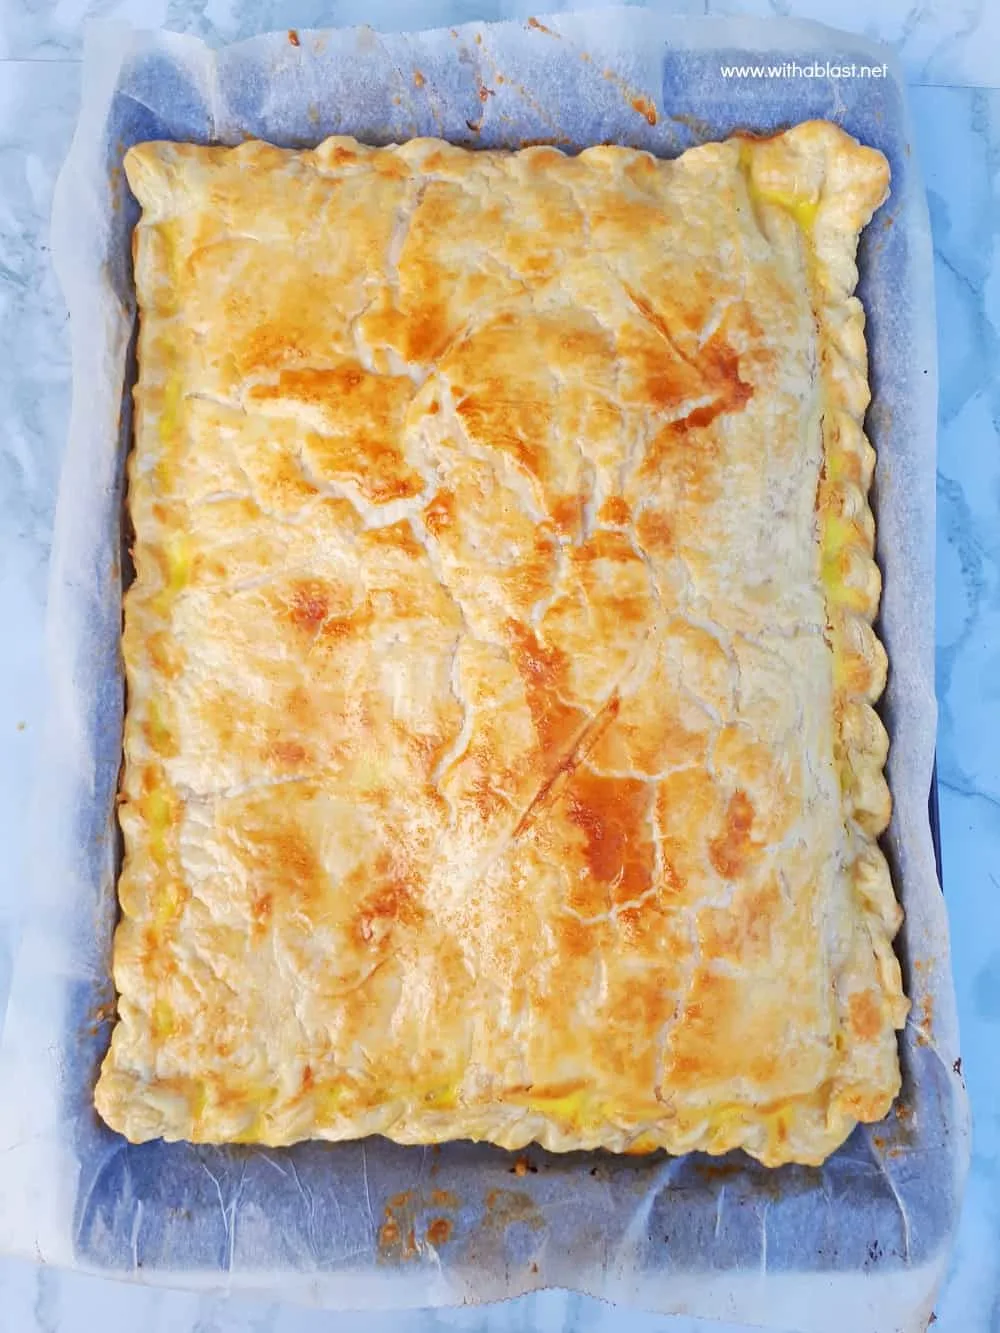 Ham and Cheese Pie is so quick and easy to make using a sheet pan and you can easily fit two pans into your oven - serve as a snack, breakfast or light dinner